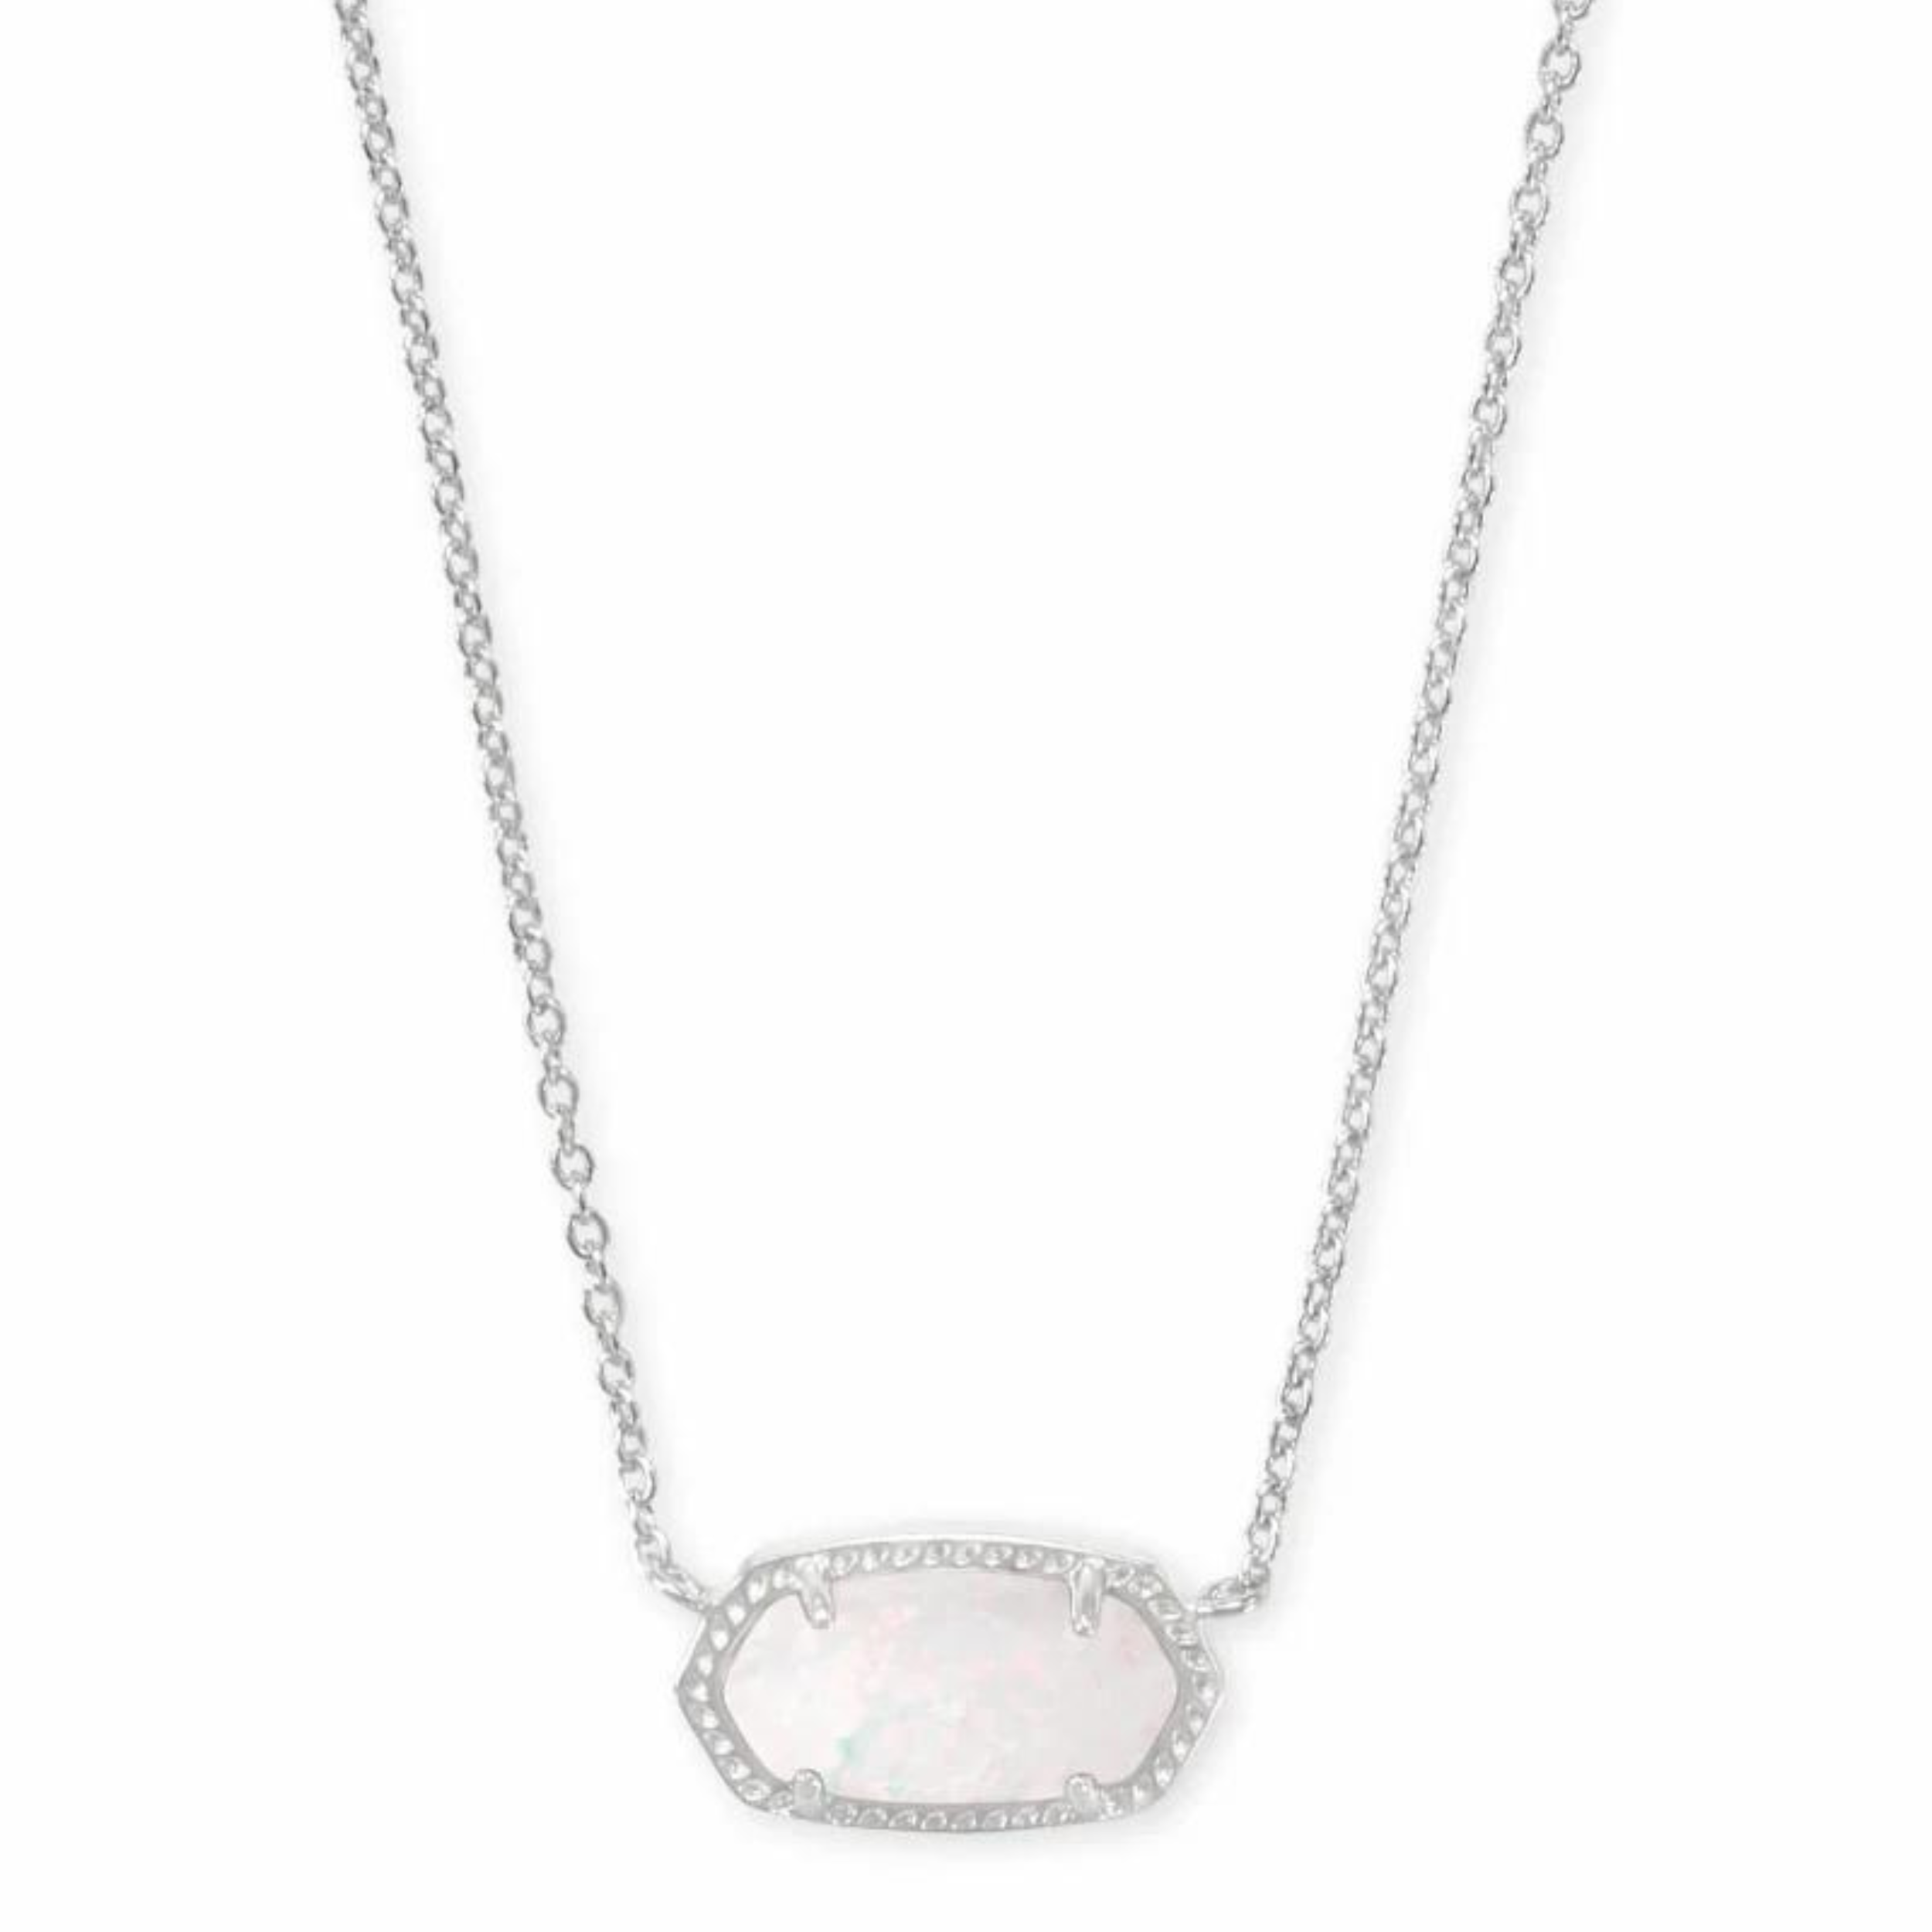 Silver pendant necklace with white opal stone, pictured on a white background.